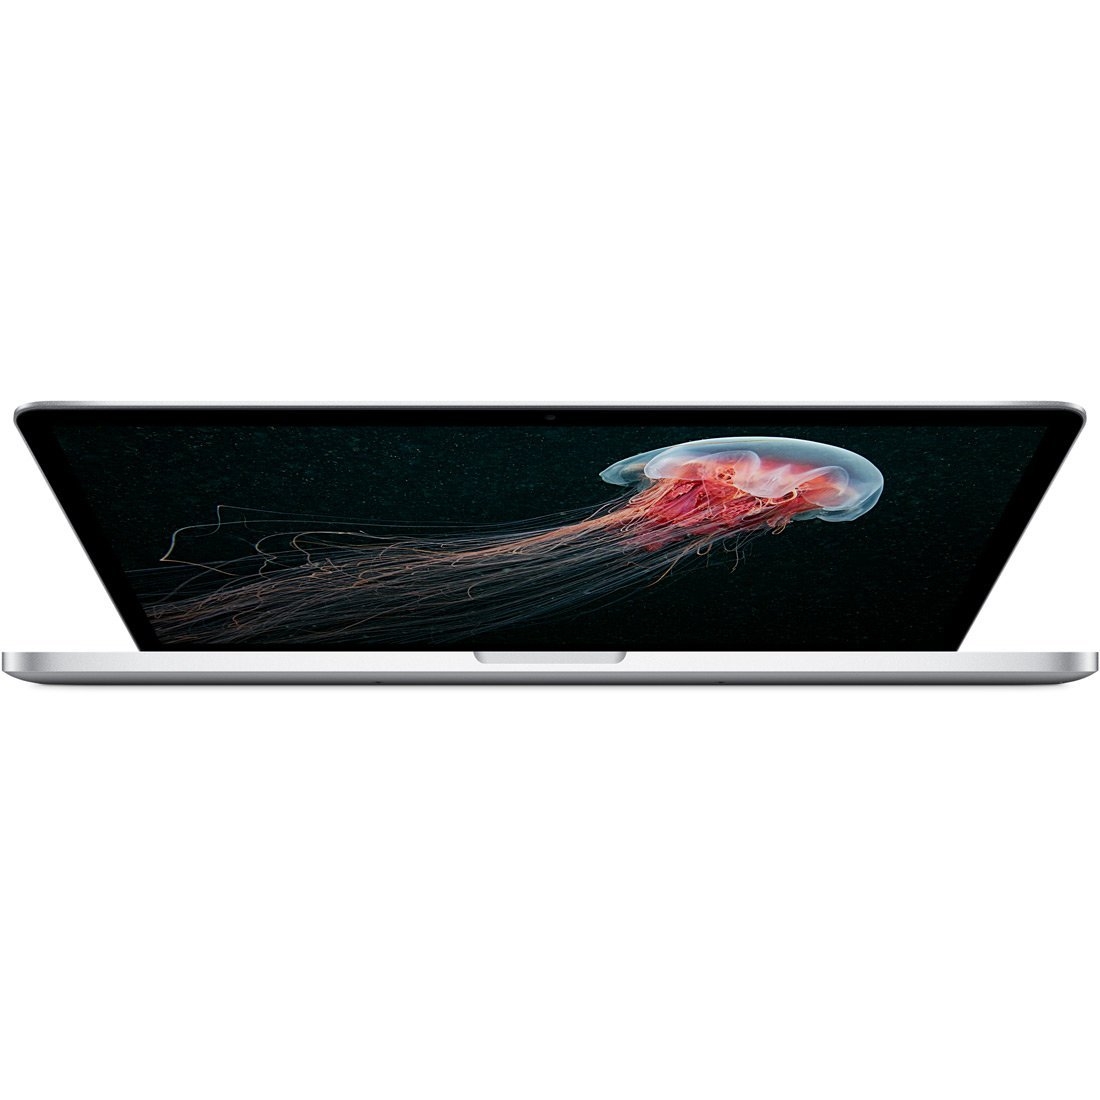 Apple Macbook Pro 15.4 inch Laptop, 2.5GHz i7 Retina Force Touch 16GB DDR3 Memory, 512 GB SSD - Used - image 2 of 4